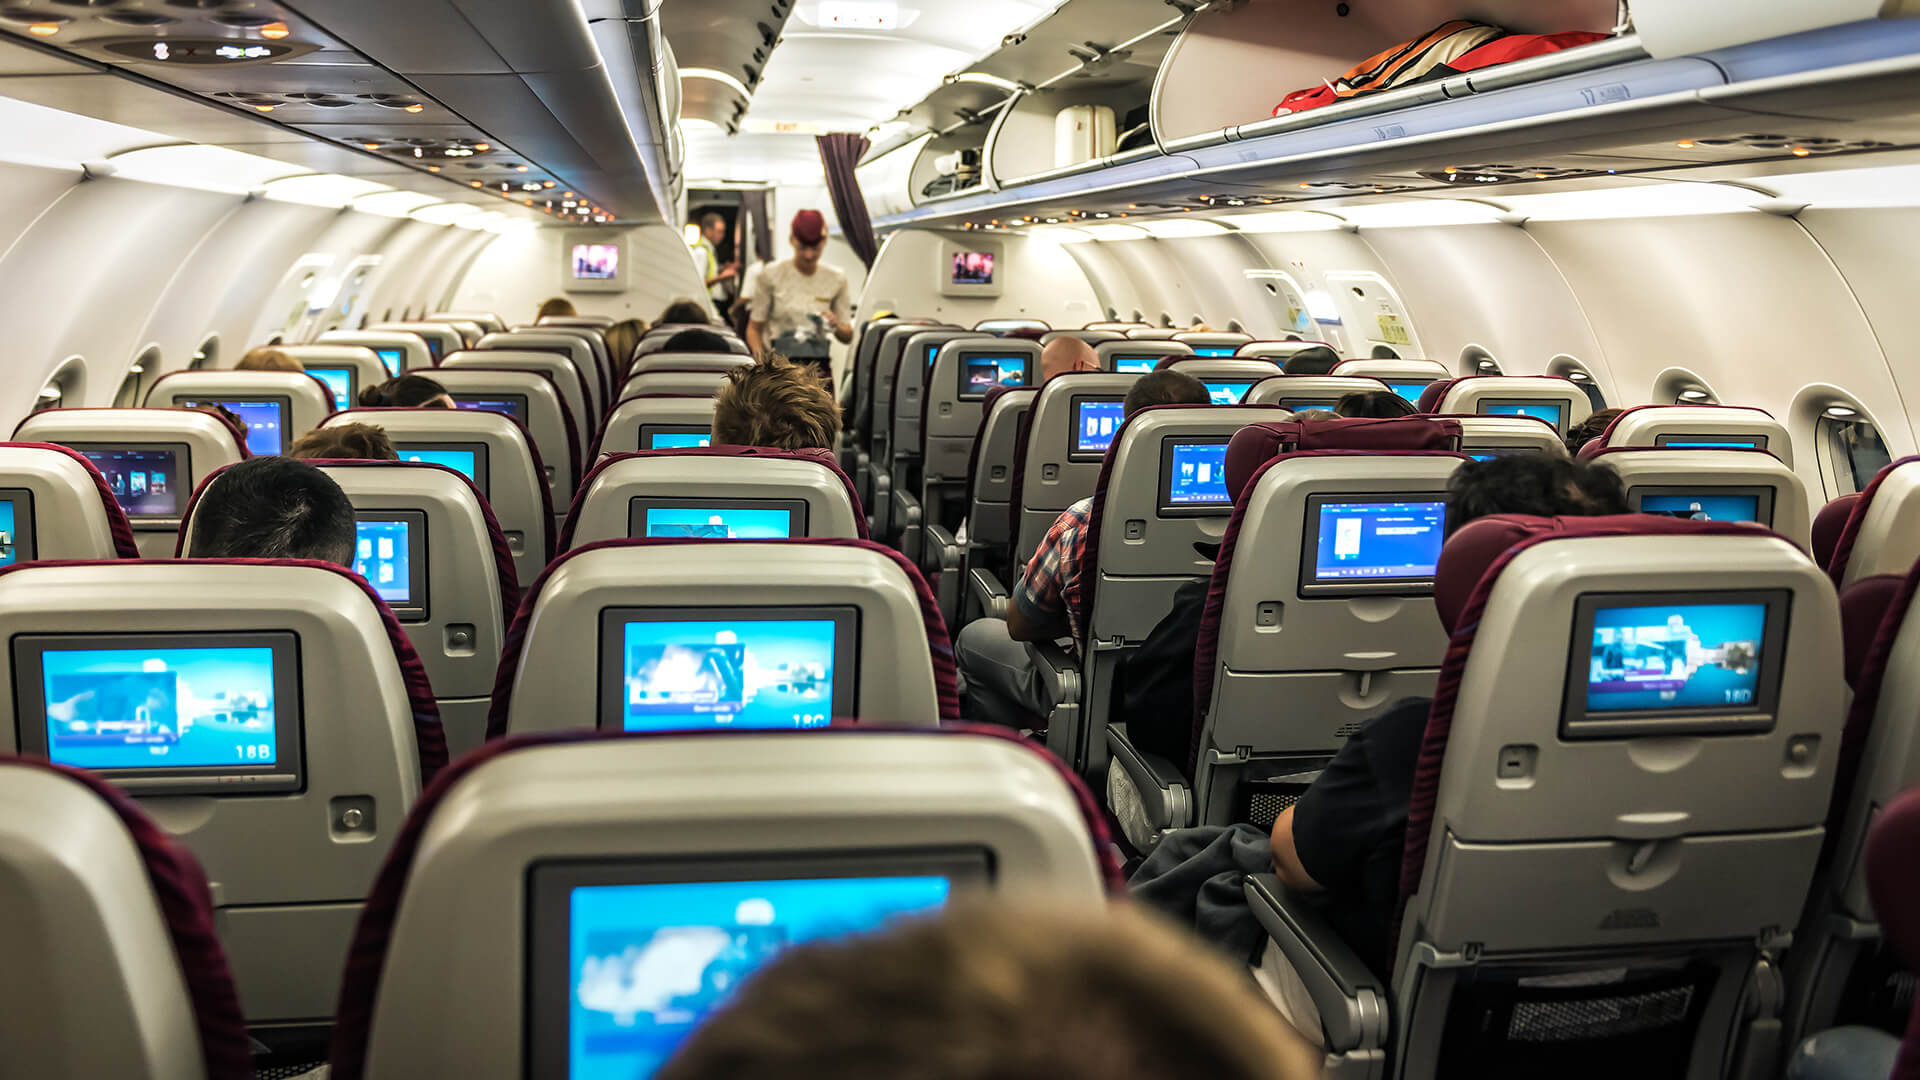 Business travel is returning to planes like this single-aisle jet